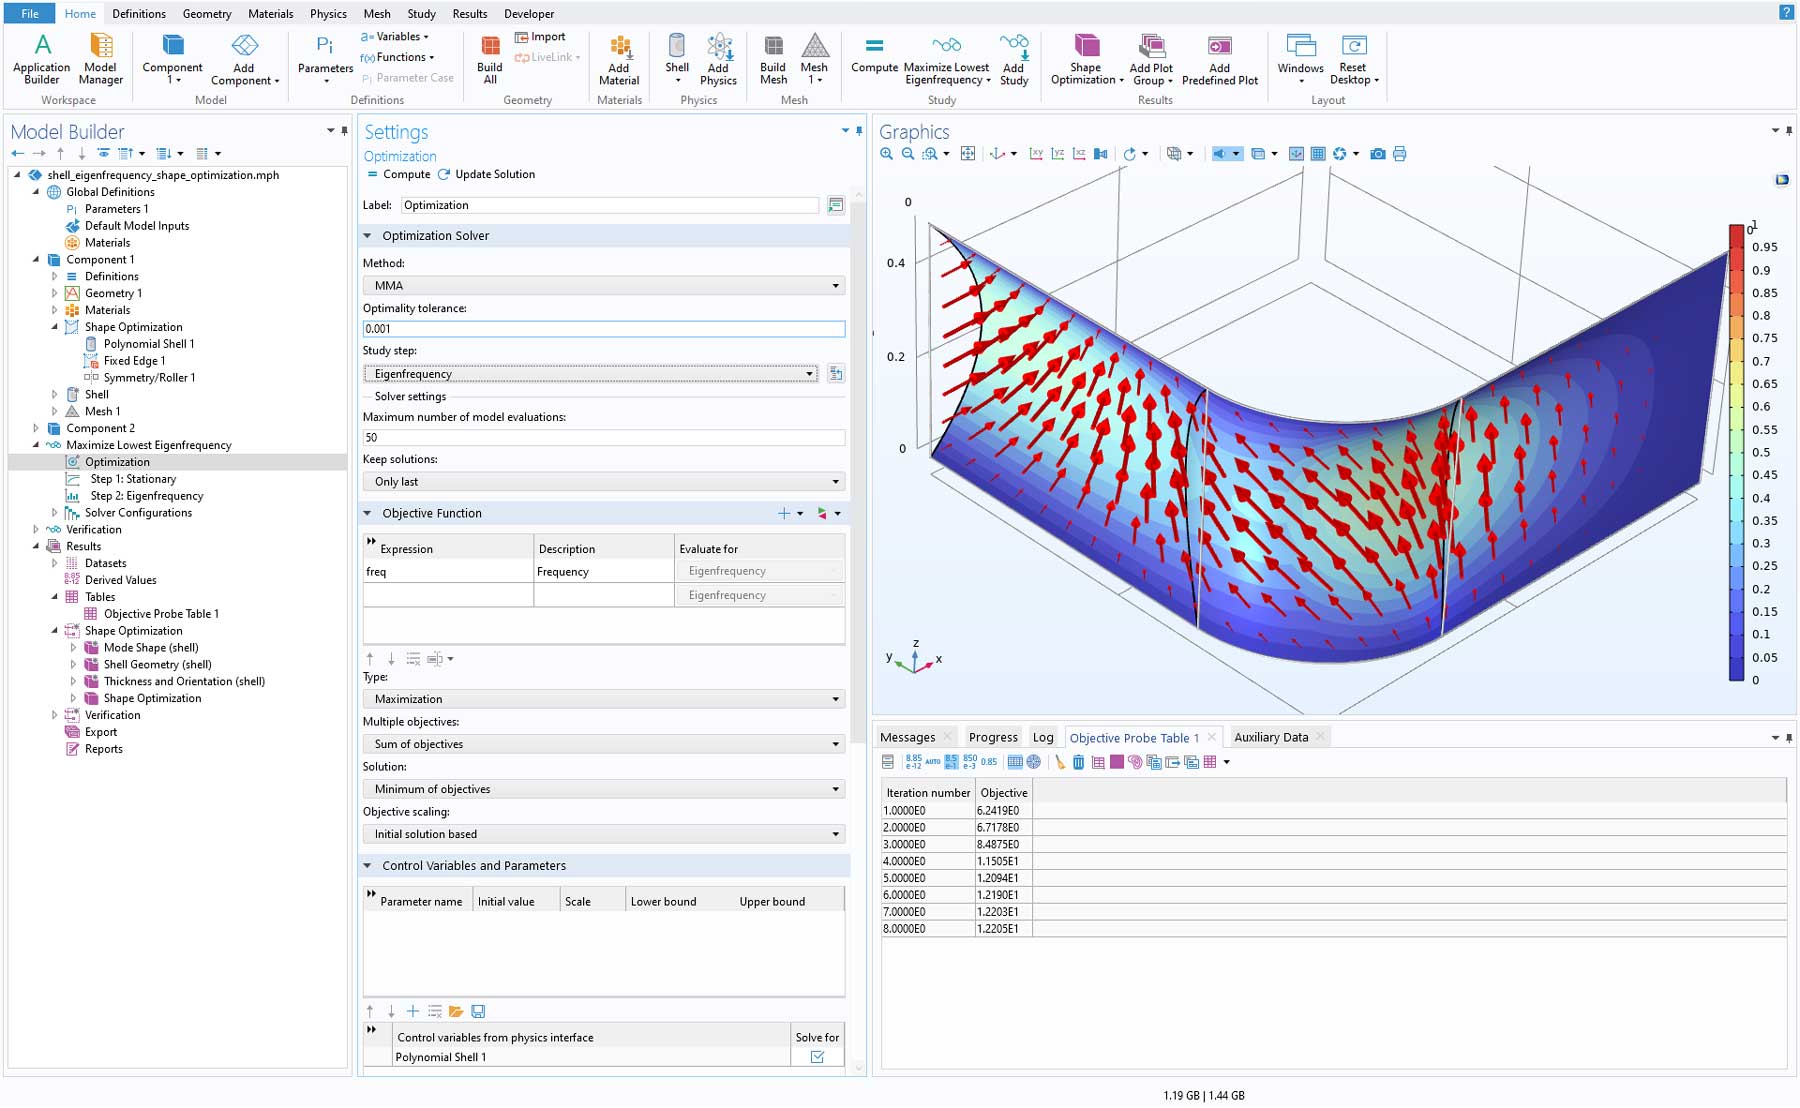 The COMSOL Multiphysics UI showing the Model Builder with the Optimization node highlighted, the corresponding Settings window, a shell model in the Graphics window, and the Objective Probe Table.